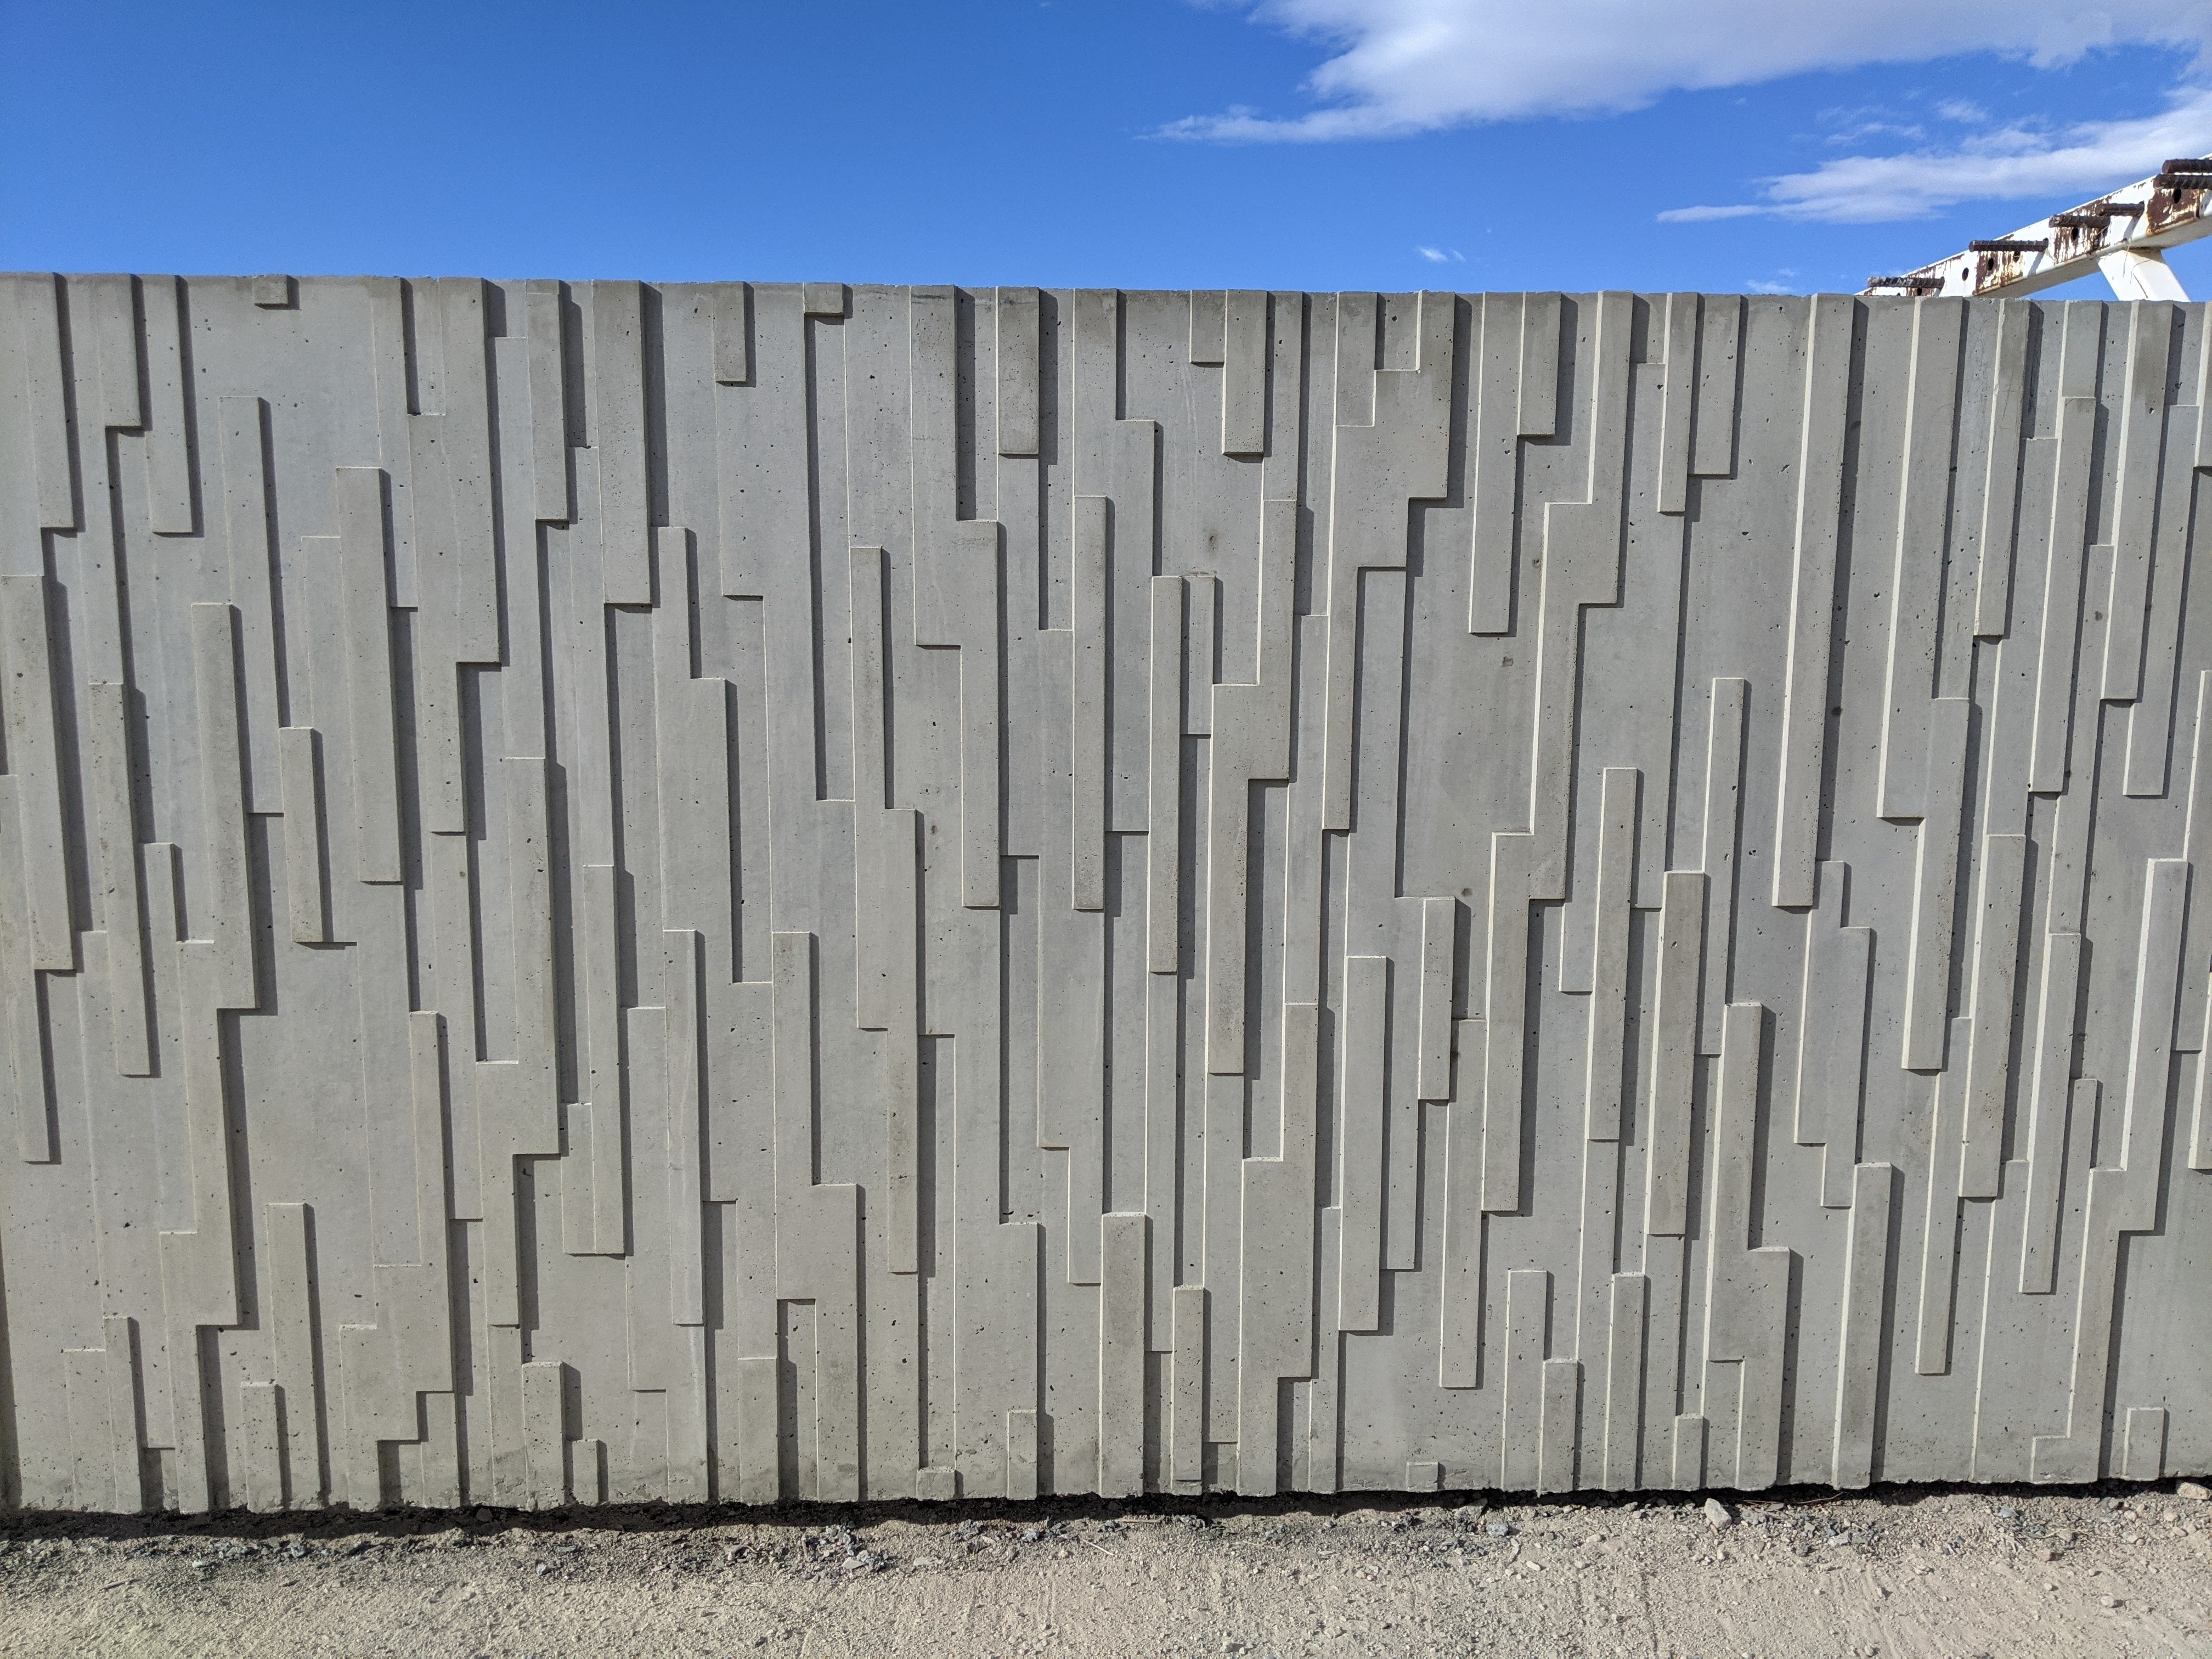 Noise wall along I-70 after detail image